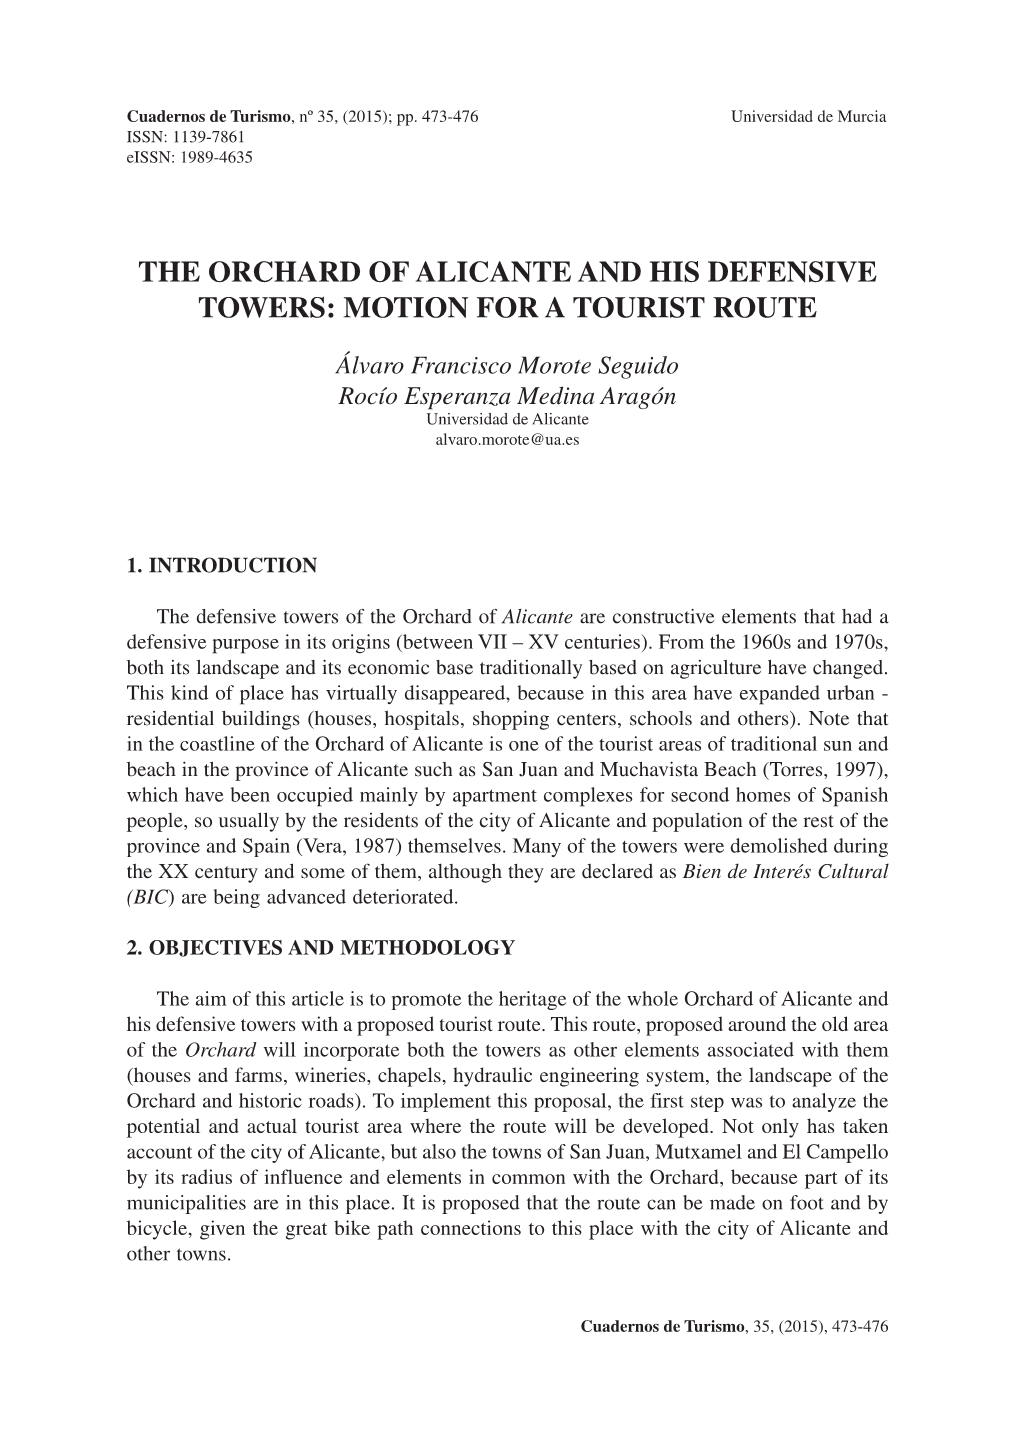 The Orchard of Alicante and His Defensive Towers: Motion for a Tourist Route